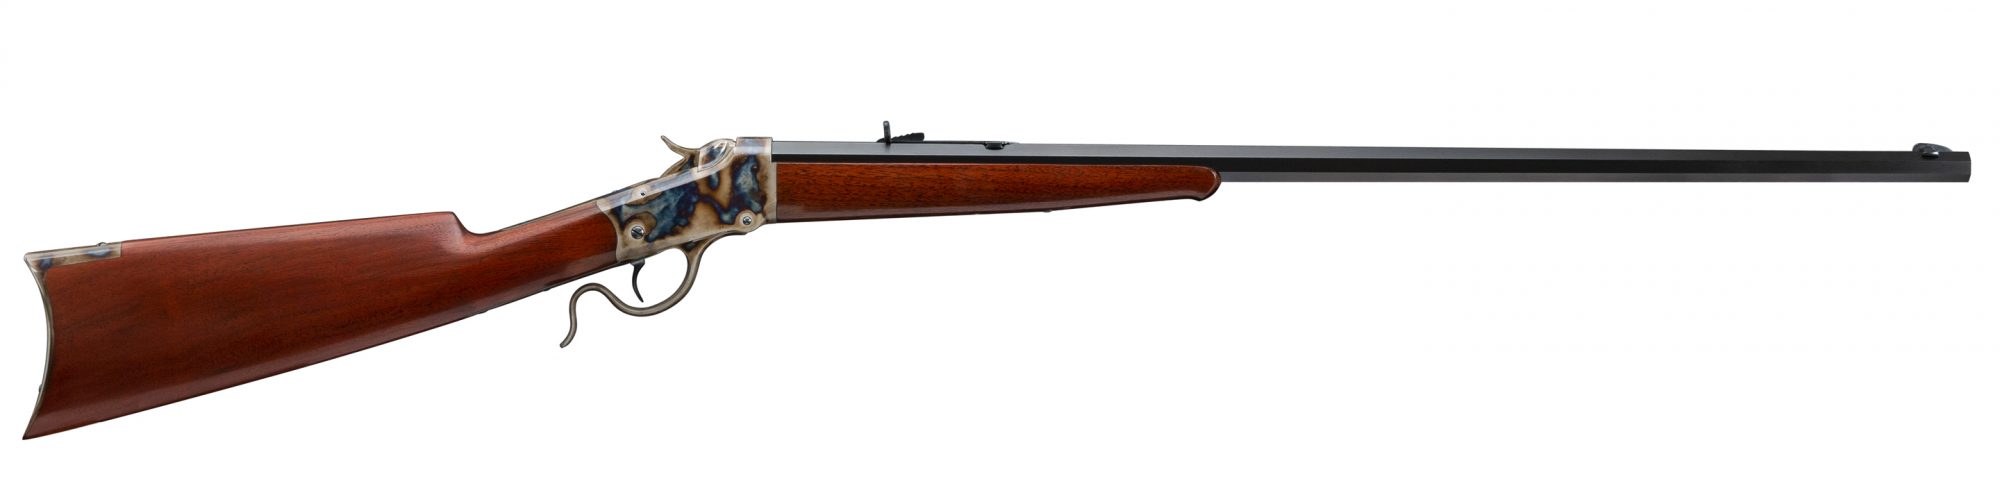 Photo of a Winchester Model 1885 single shot rifle, after restoration by Turnbull Restoration Co. of Bloomfield, NY